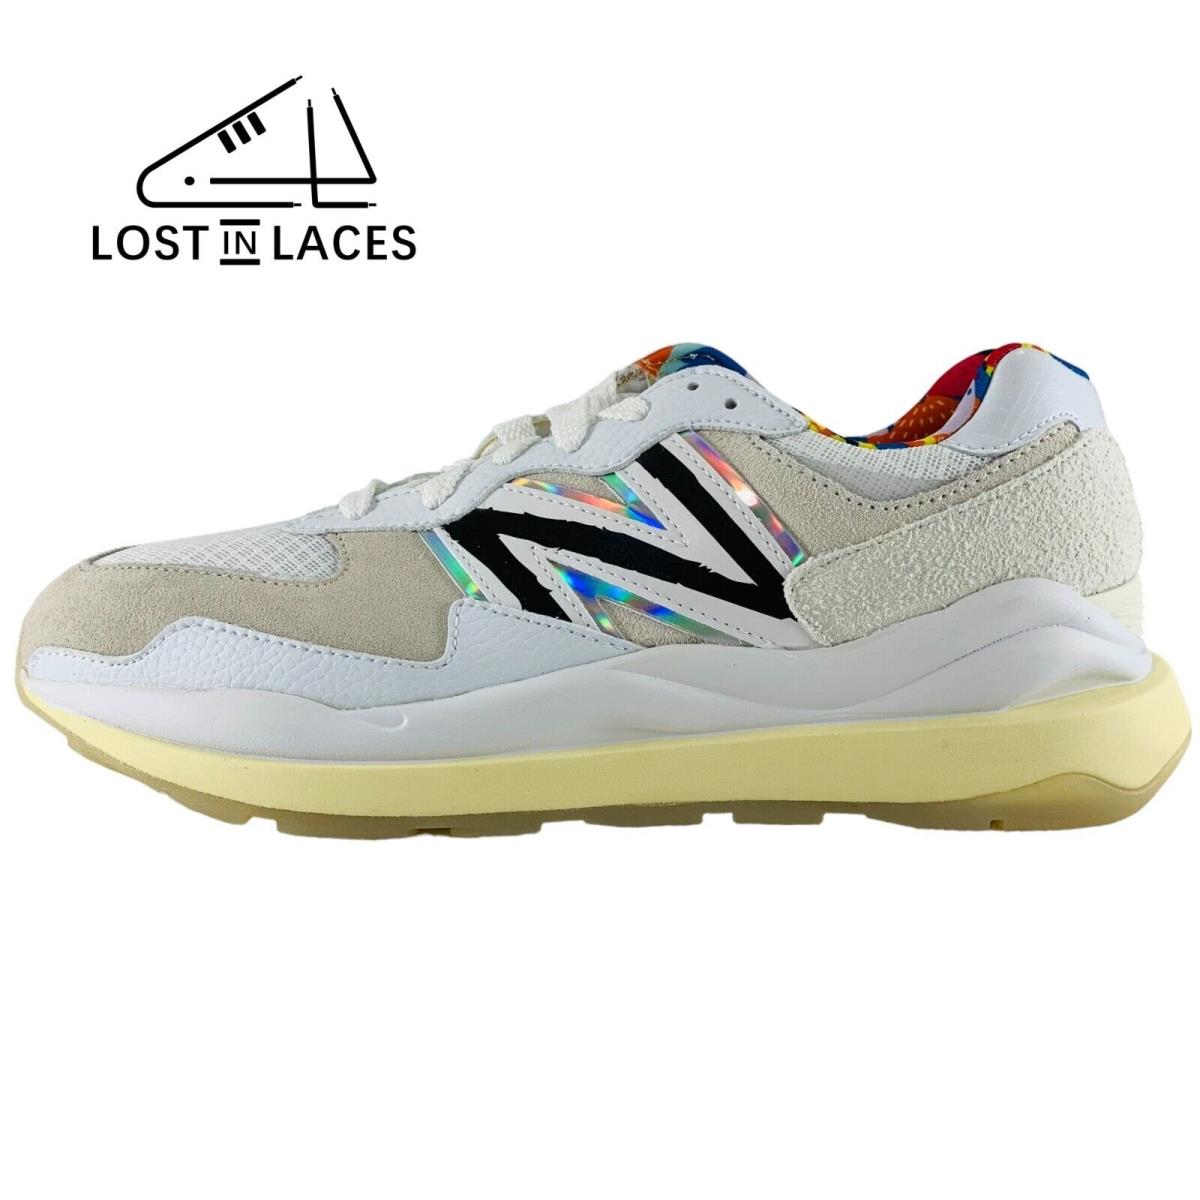 New Balance 57/40 Pride Sneakers White Multi-color New Shoes Men`s Sizes